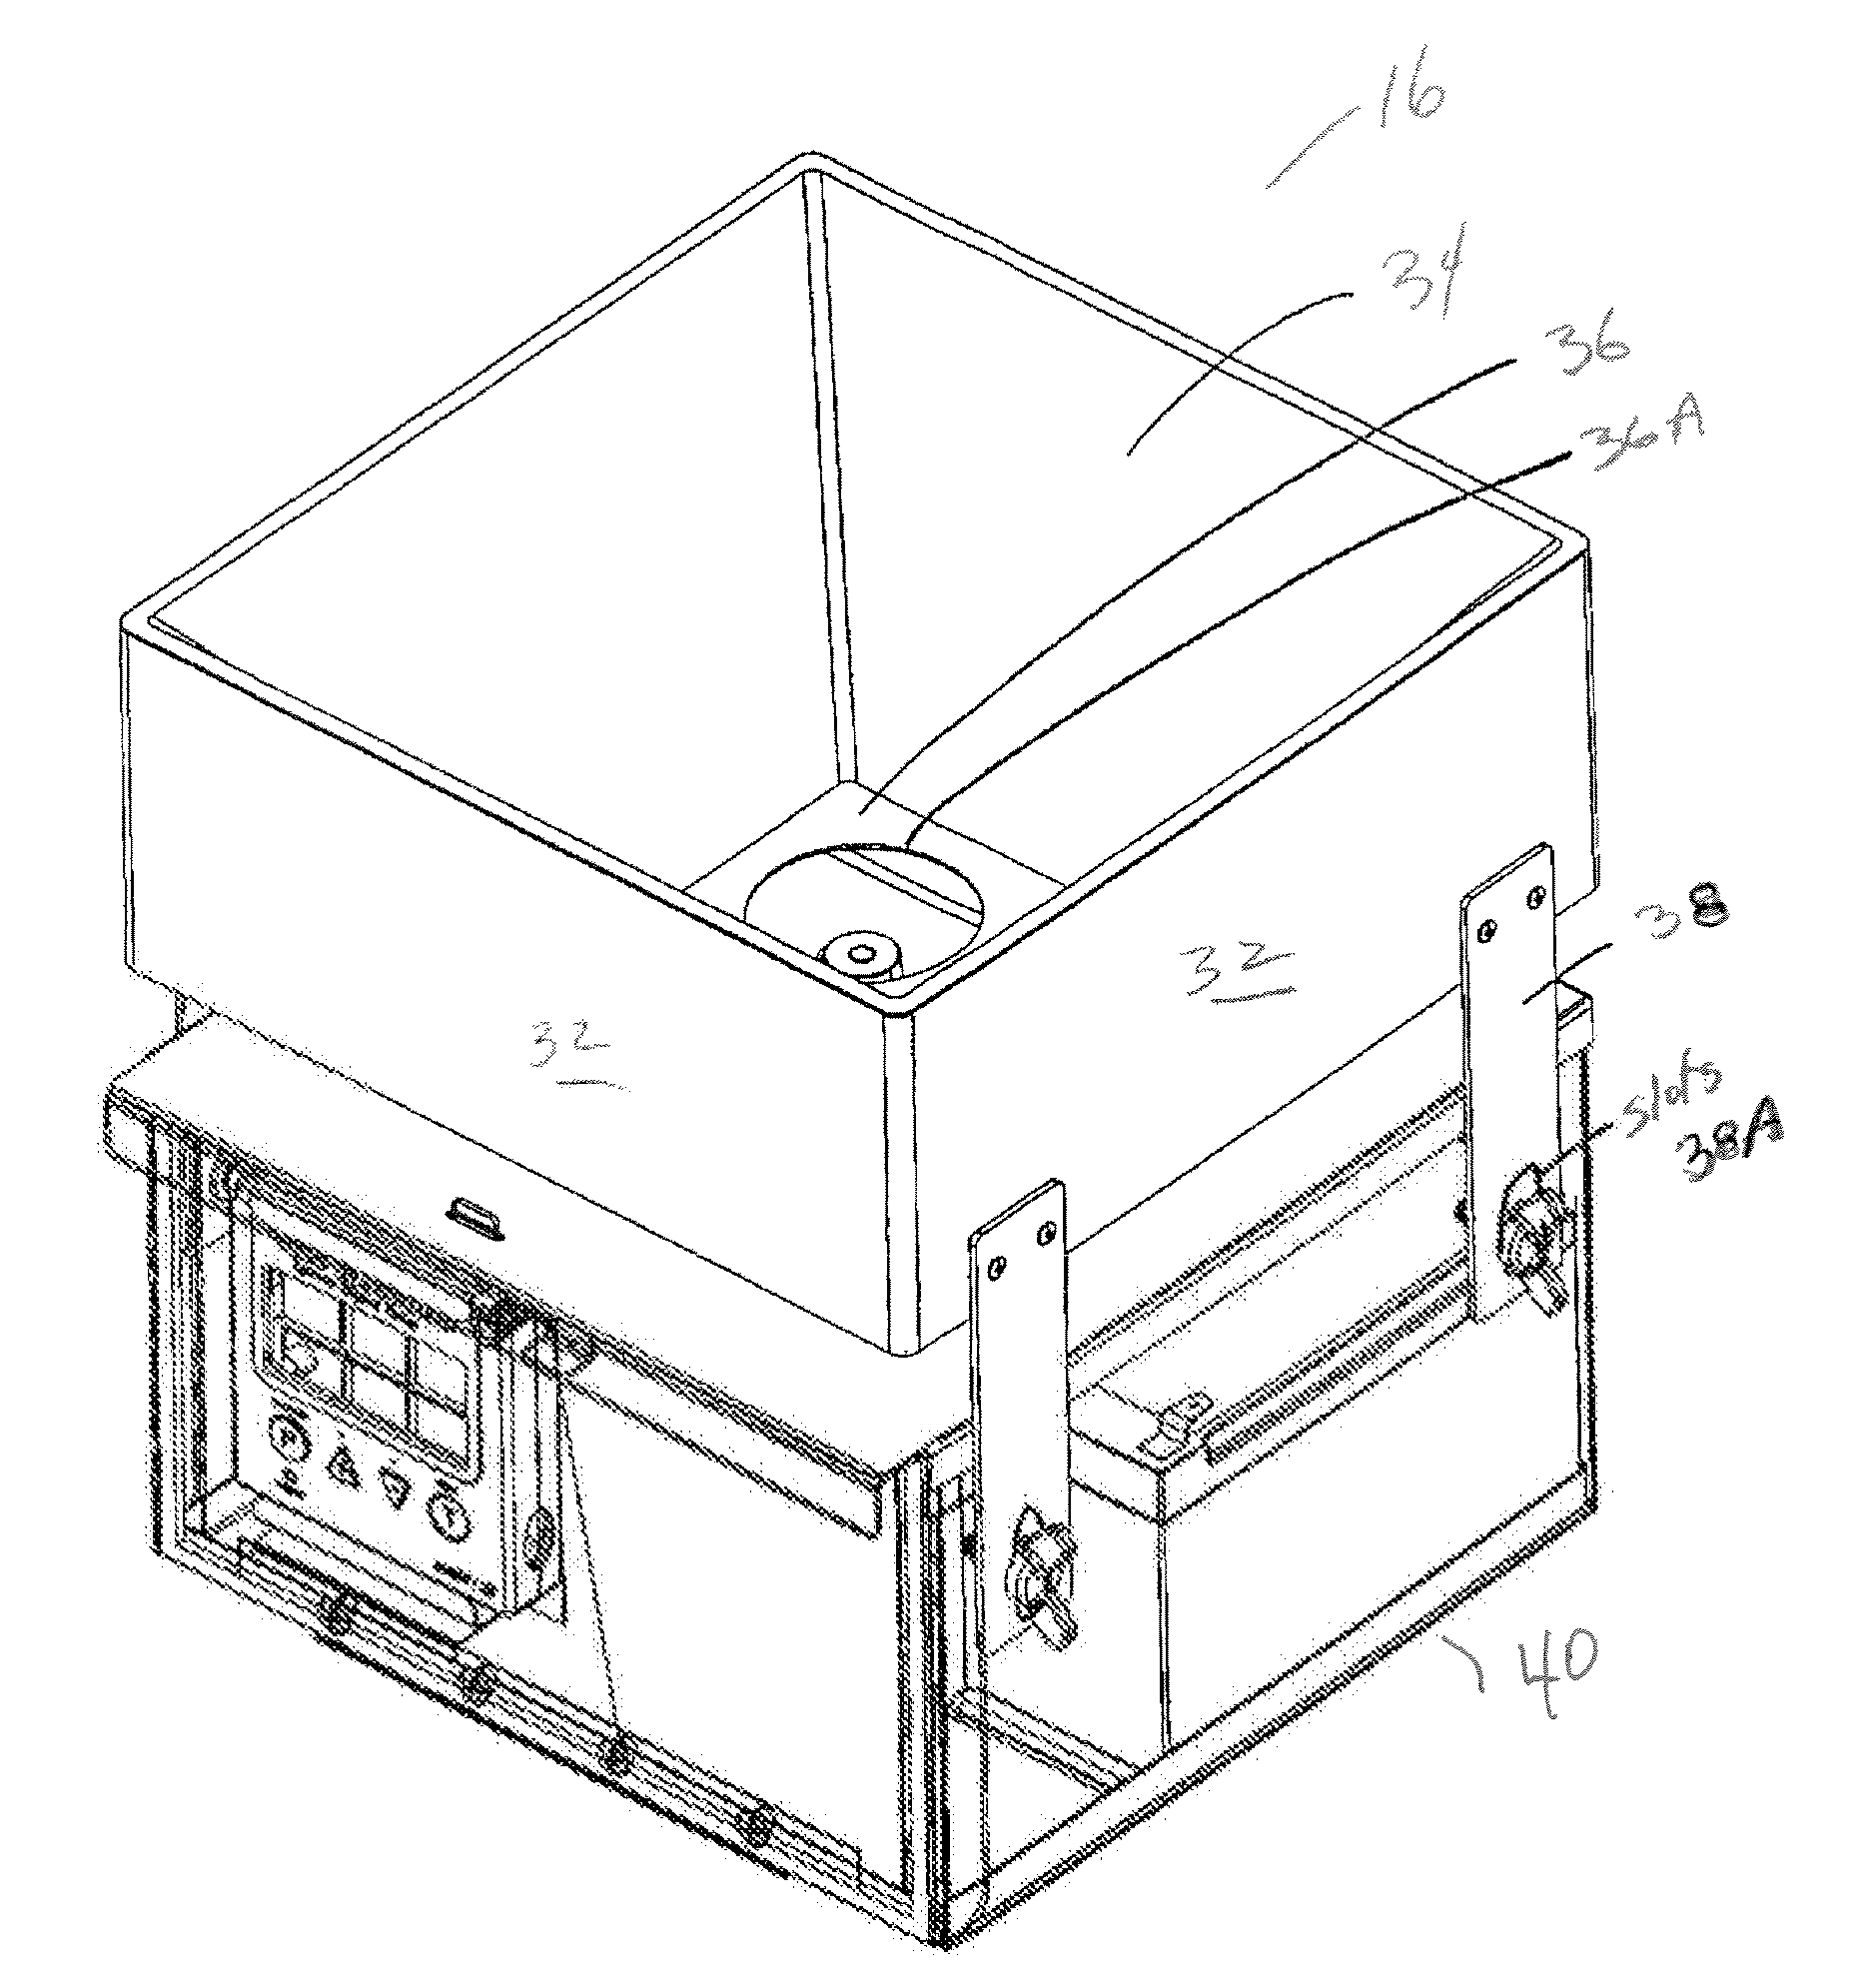 Integral control box, spinner and funnel unit with adjustable legs